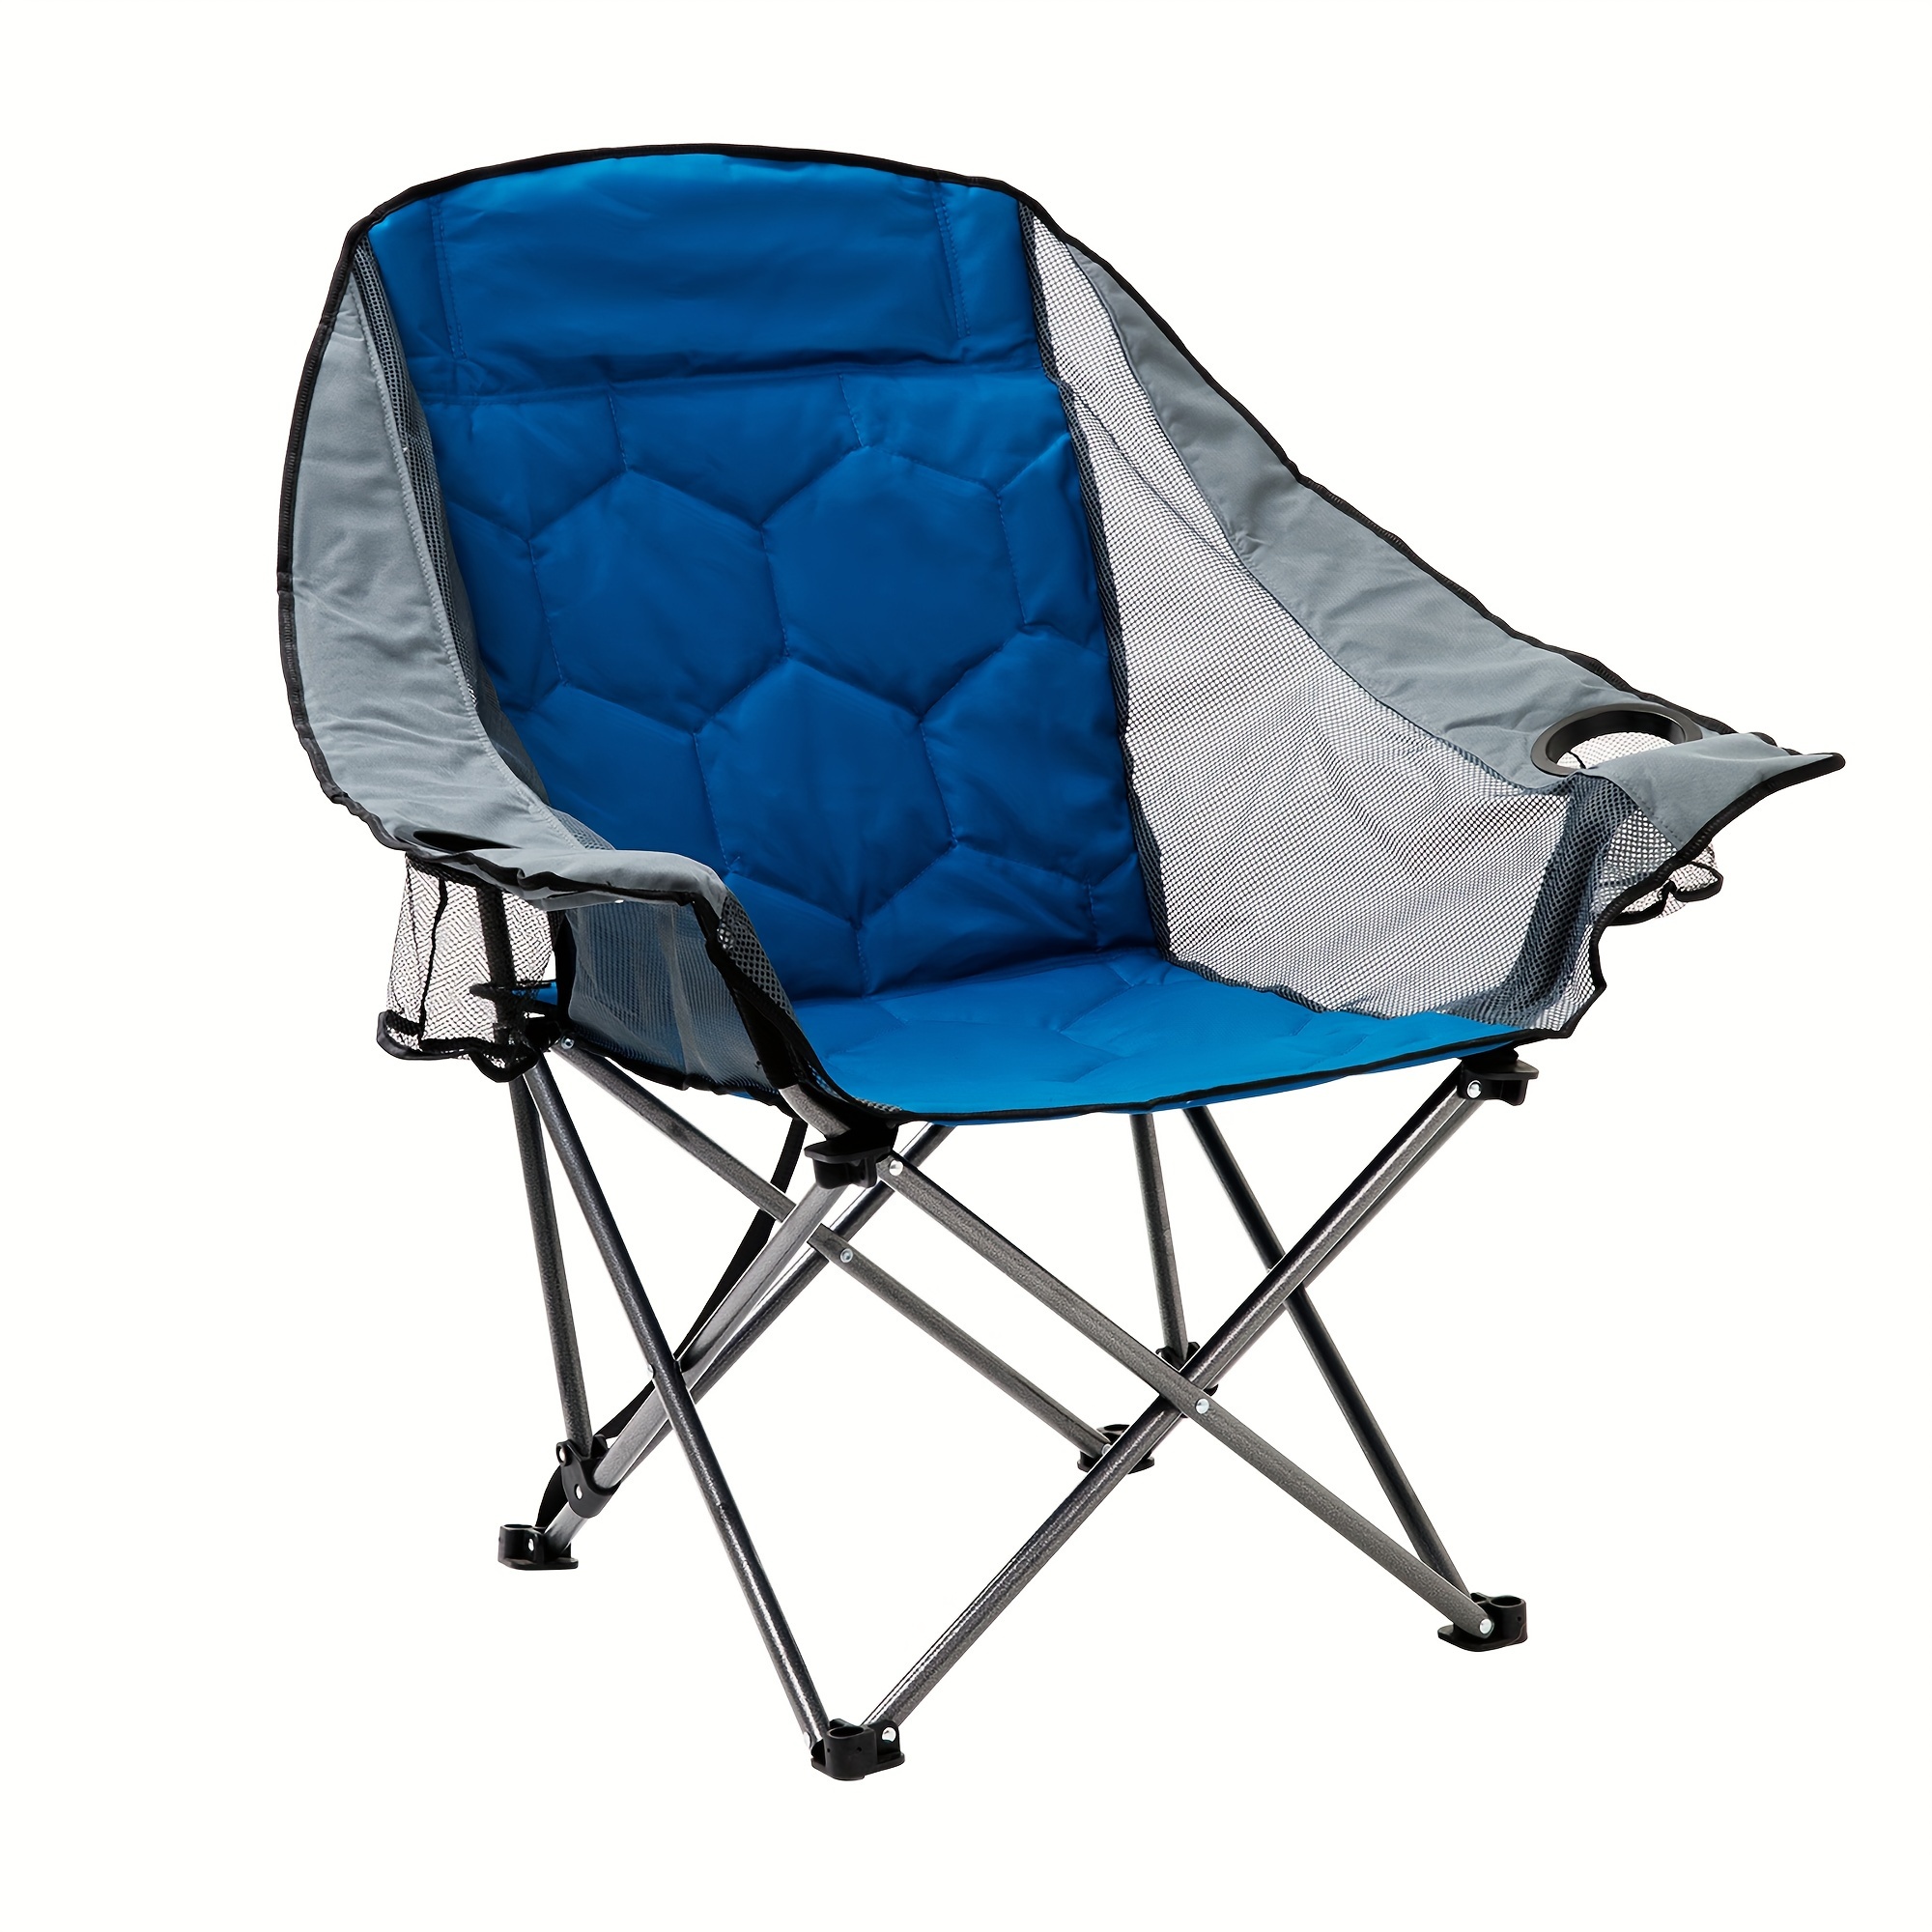 

Sunnyfeel Xl Padded Oversized Camping Chair, Heavy Duty Folding Camp Chairs W/cup Holder And Carry Bag, Portable Lawn Chairs, Foldable Outdoor Sofa For Adults, Sports, Tailgating, Beach, Rving